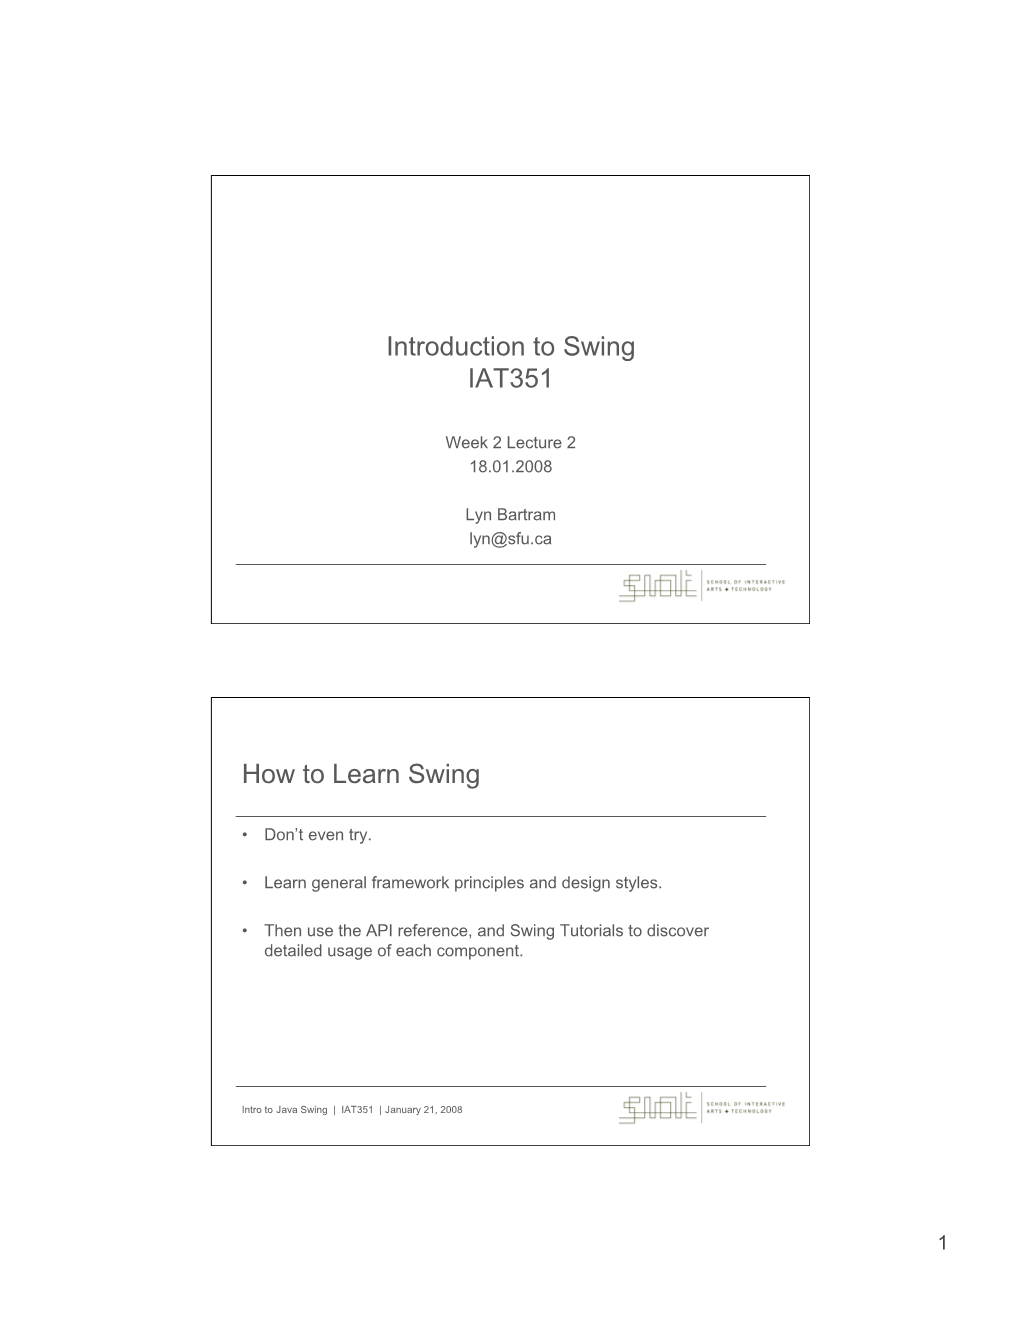 Introduction to Swing IAT351